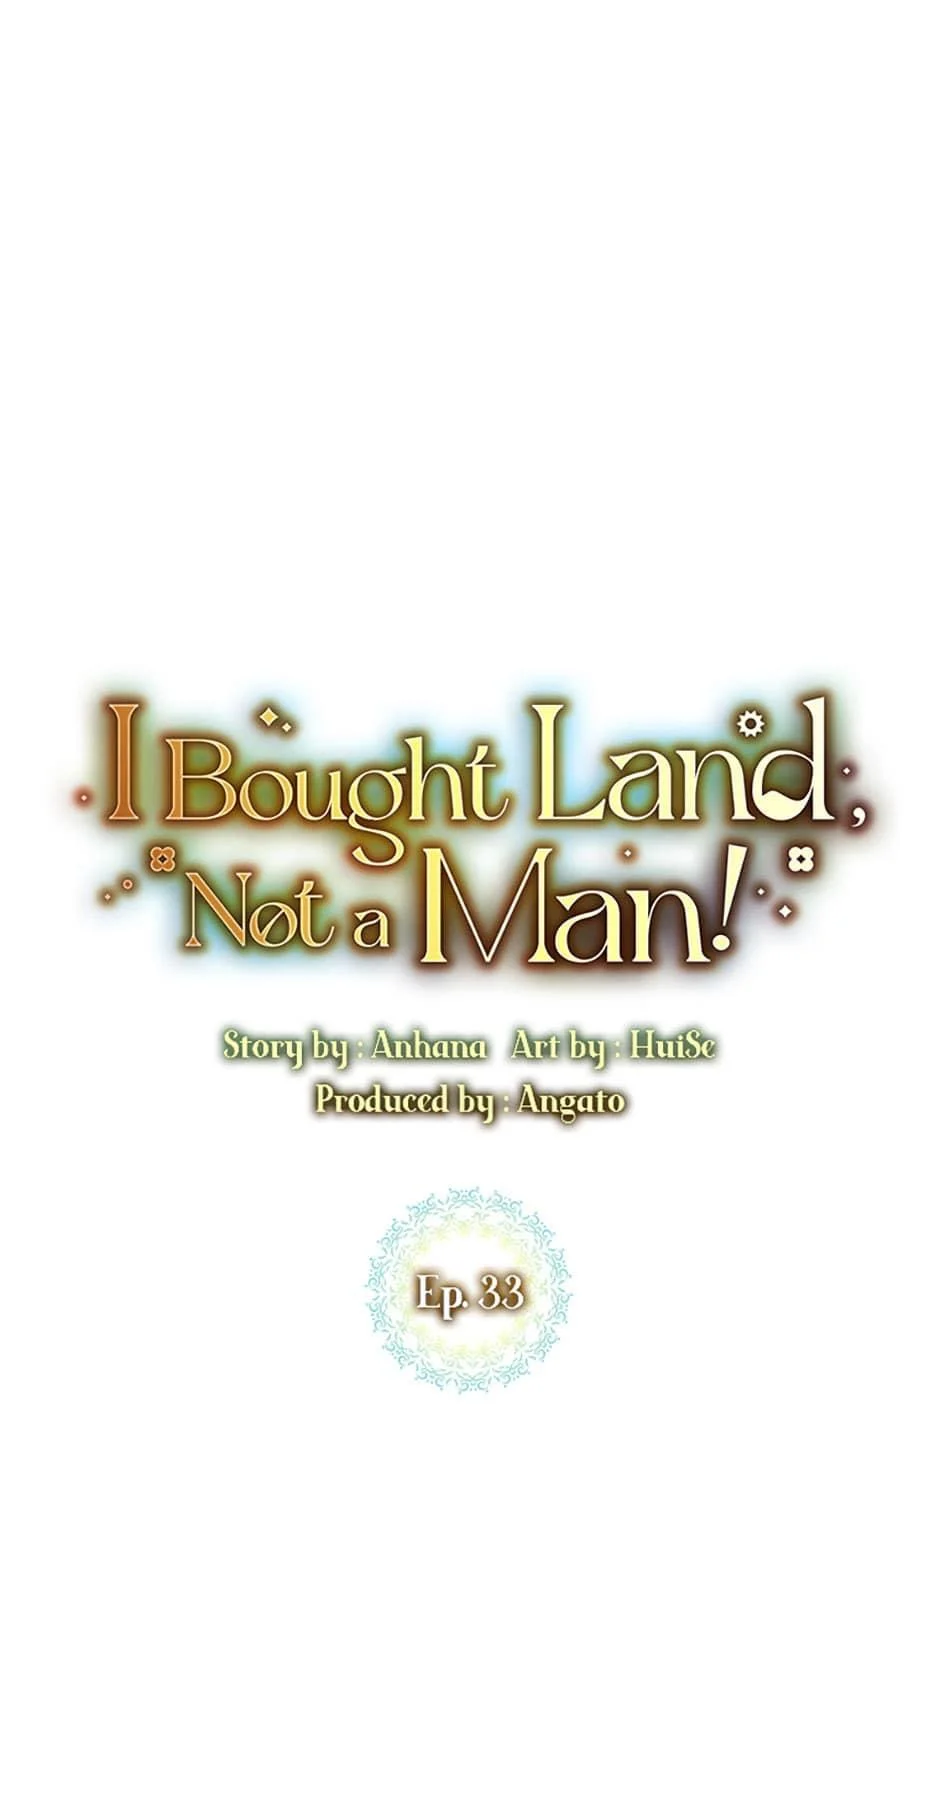 I bought the land, not the man chapter 33